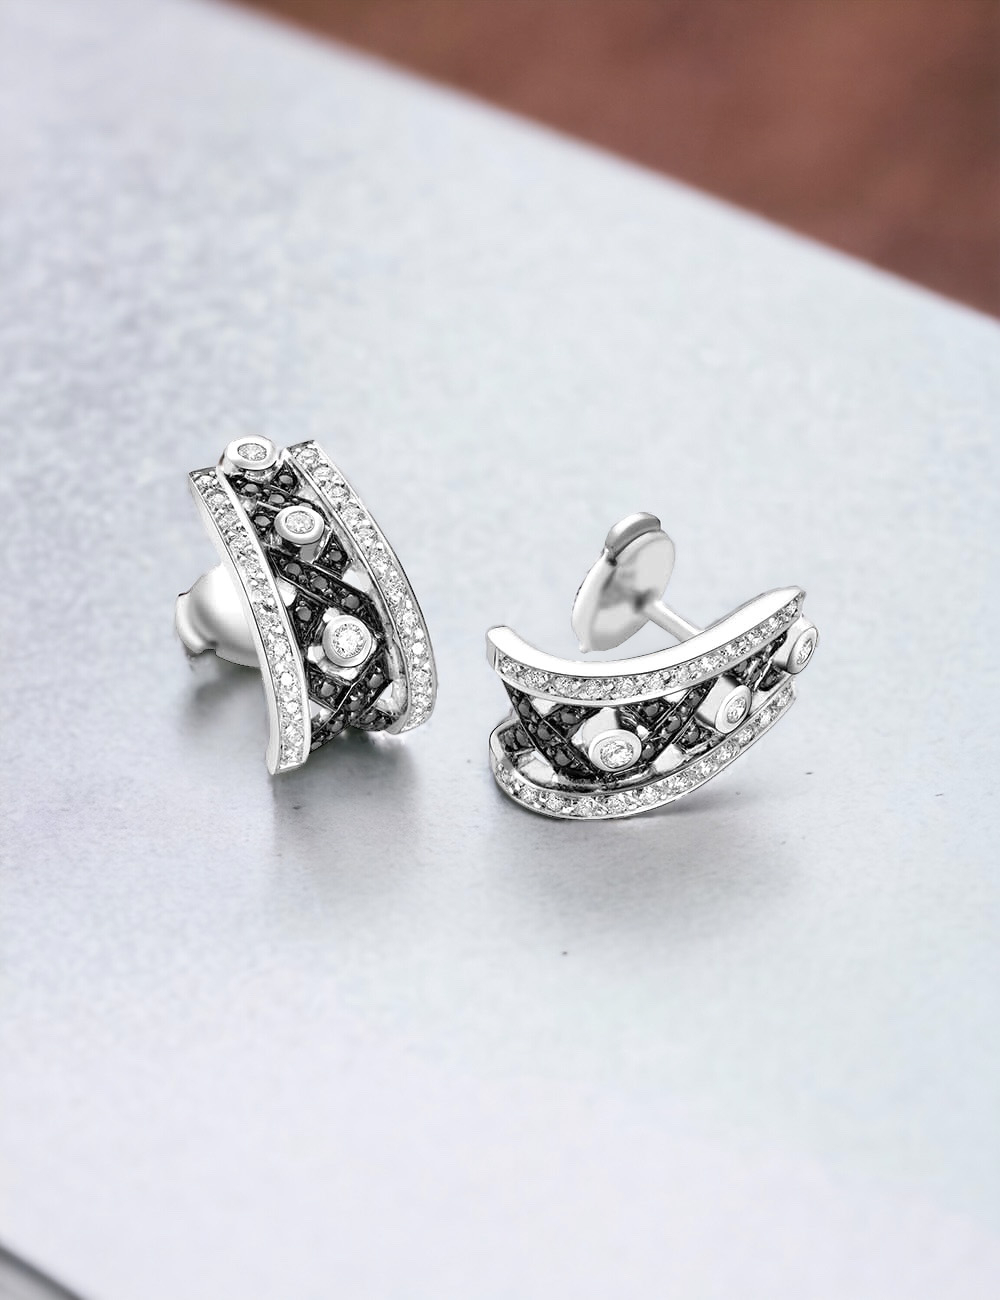 D.Bachet's BlackLight Rock earrings with black and white diamonds, a symbol of boldness.